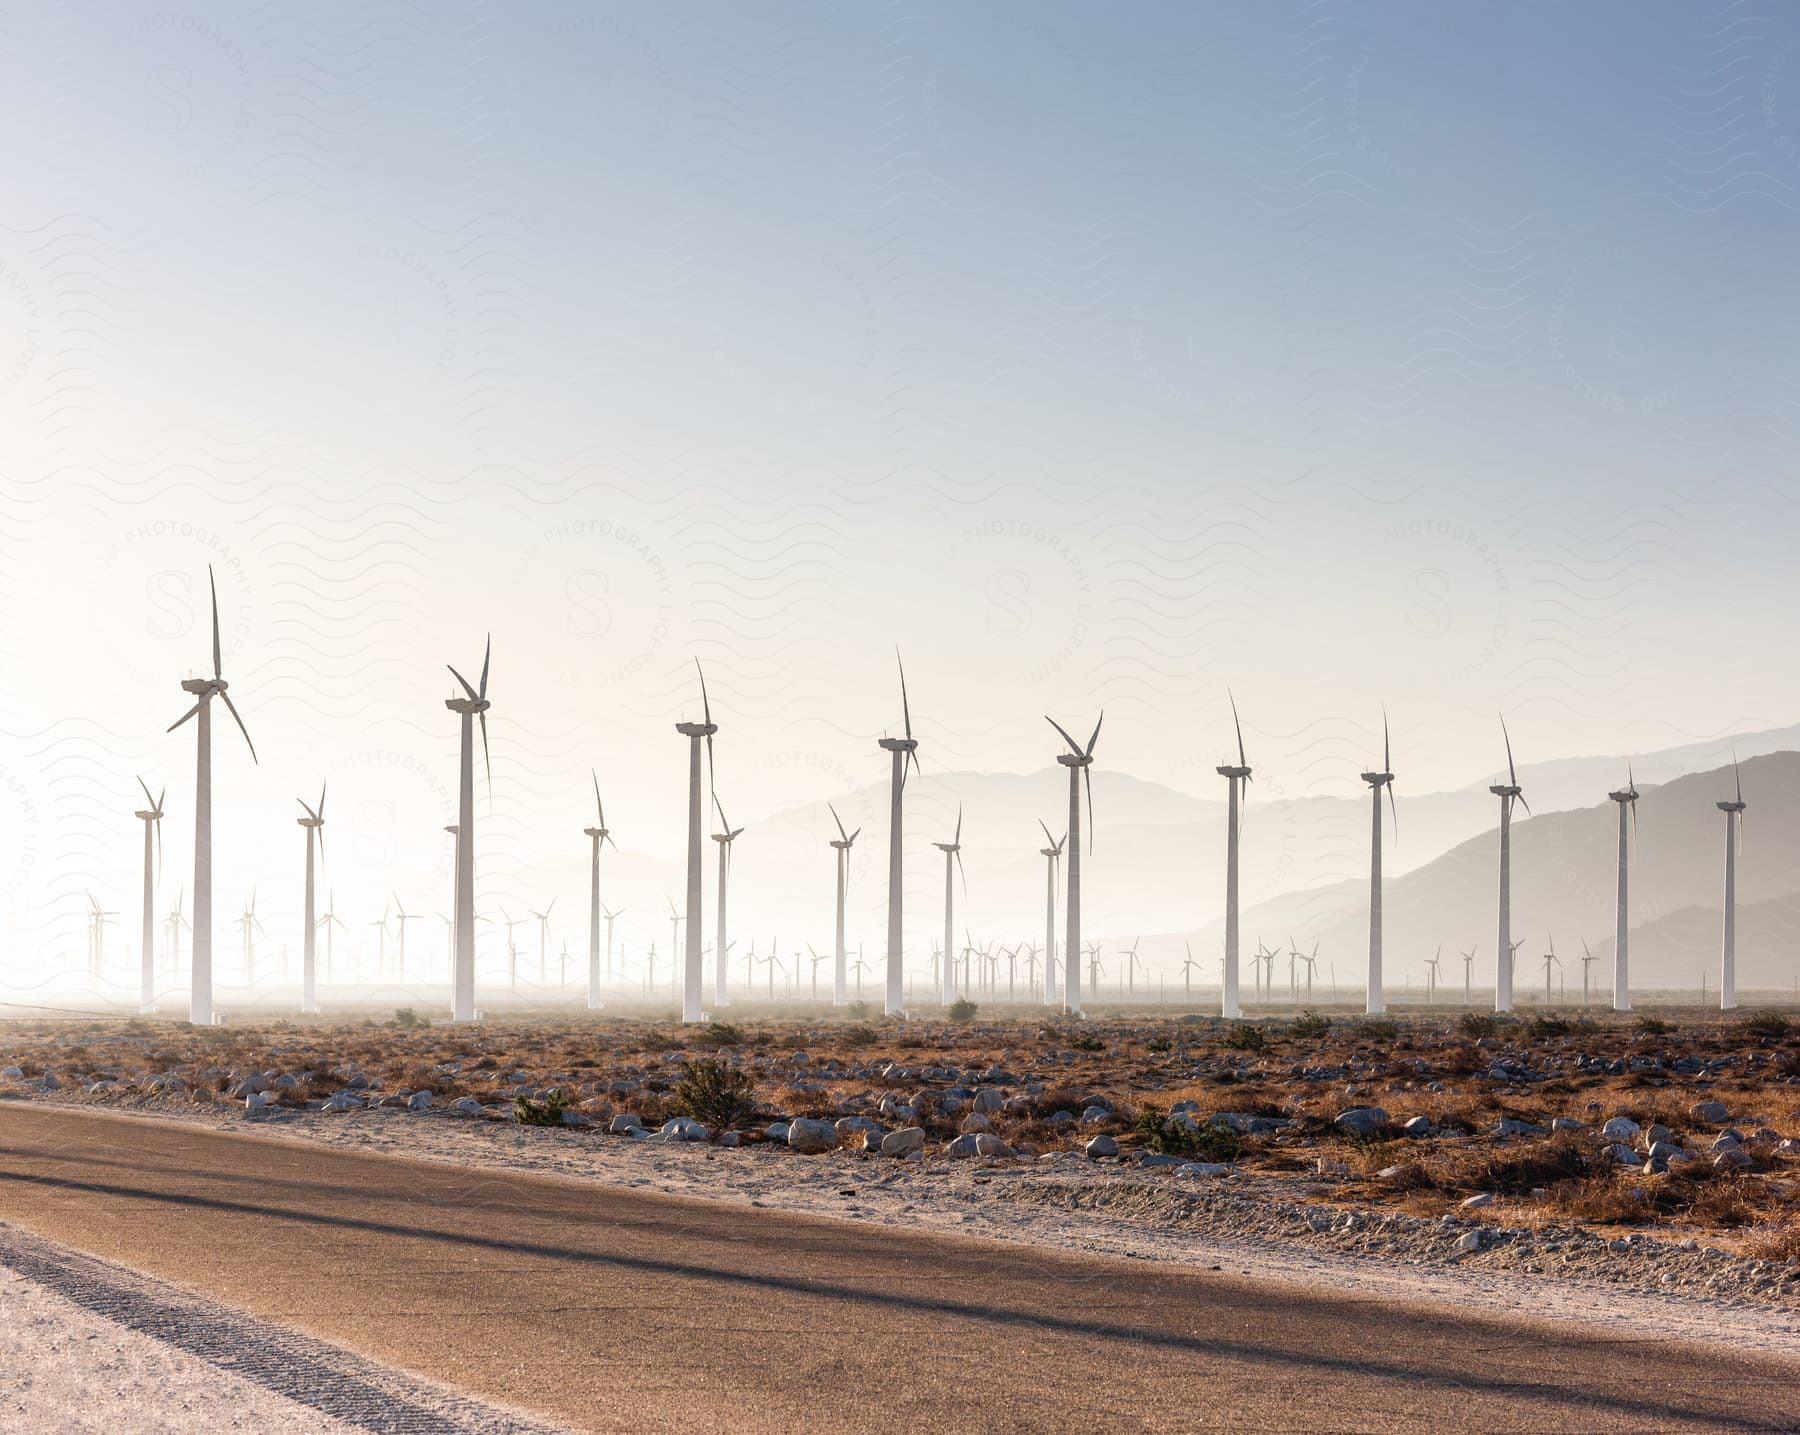 Many wind turbines stretch across the roadside with mountains in the distance under a hazy foggy sky